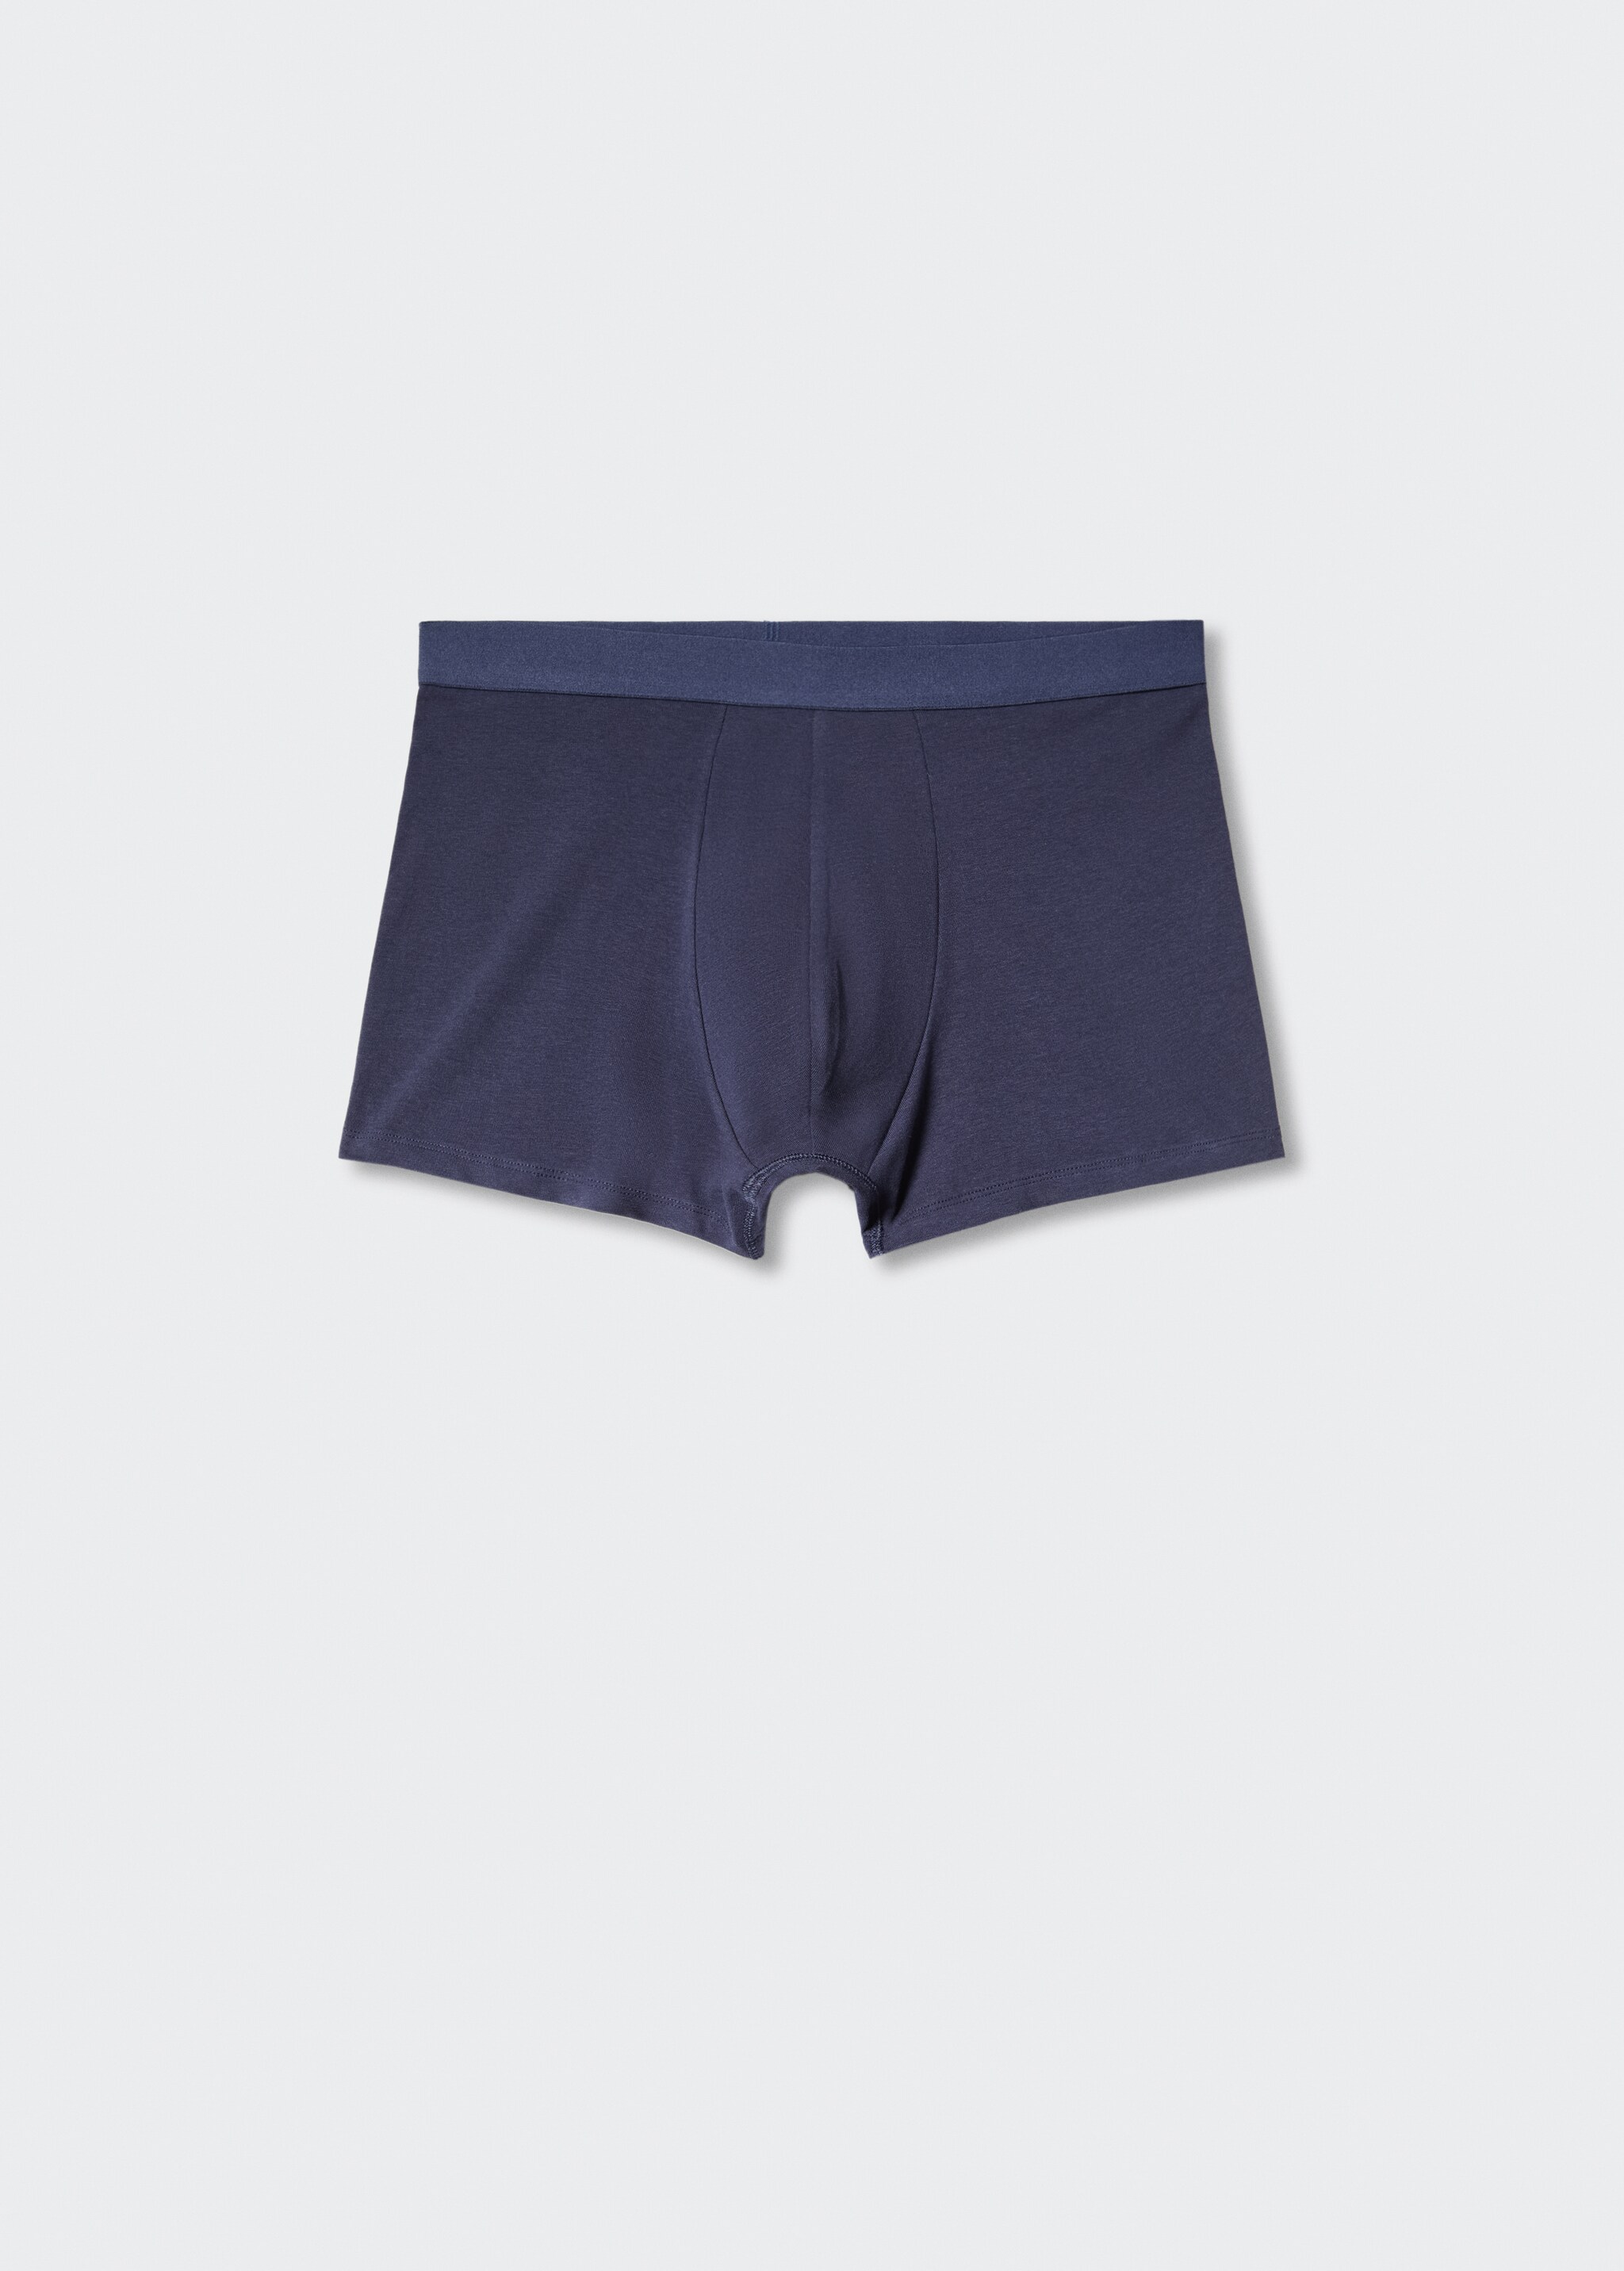 Cotton boxer shorts - Article without model